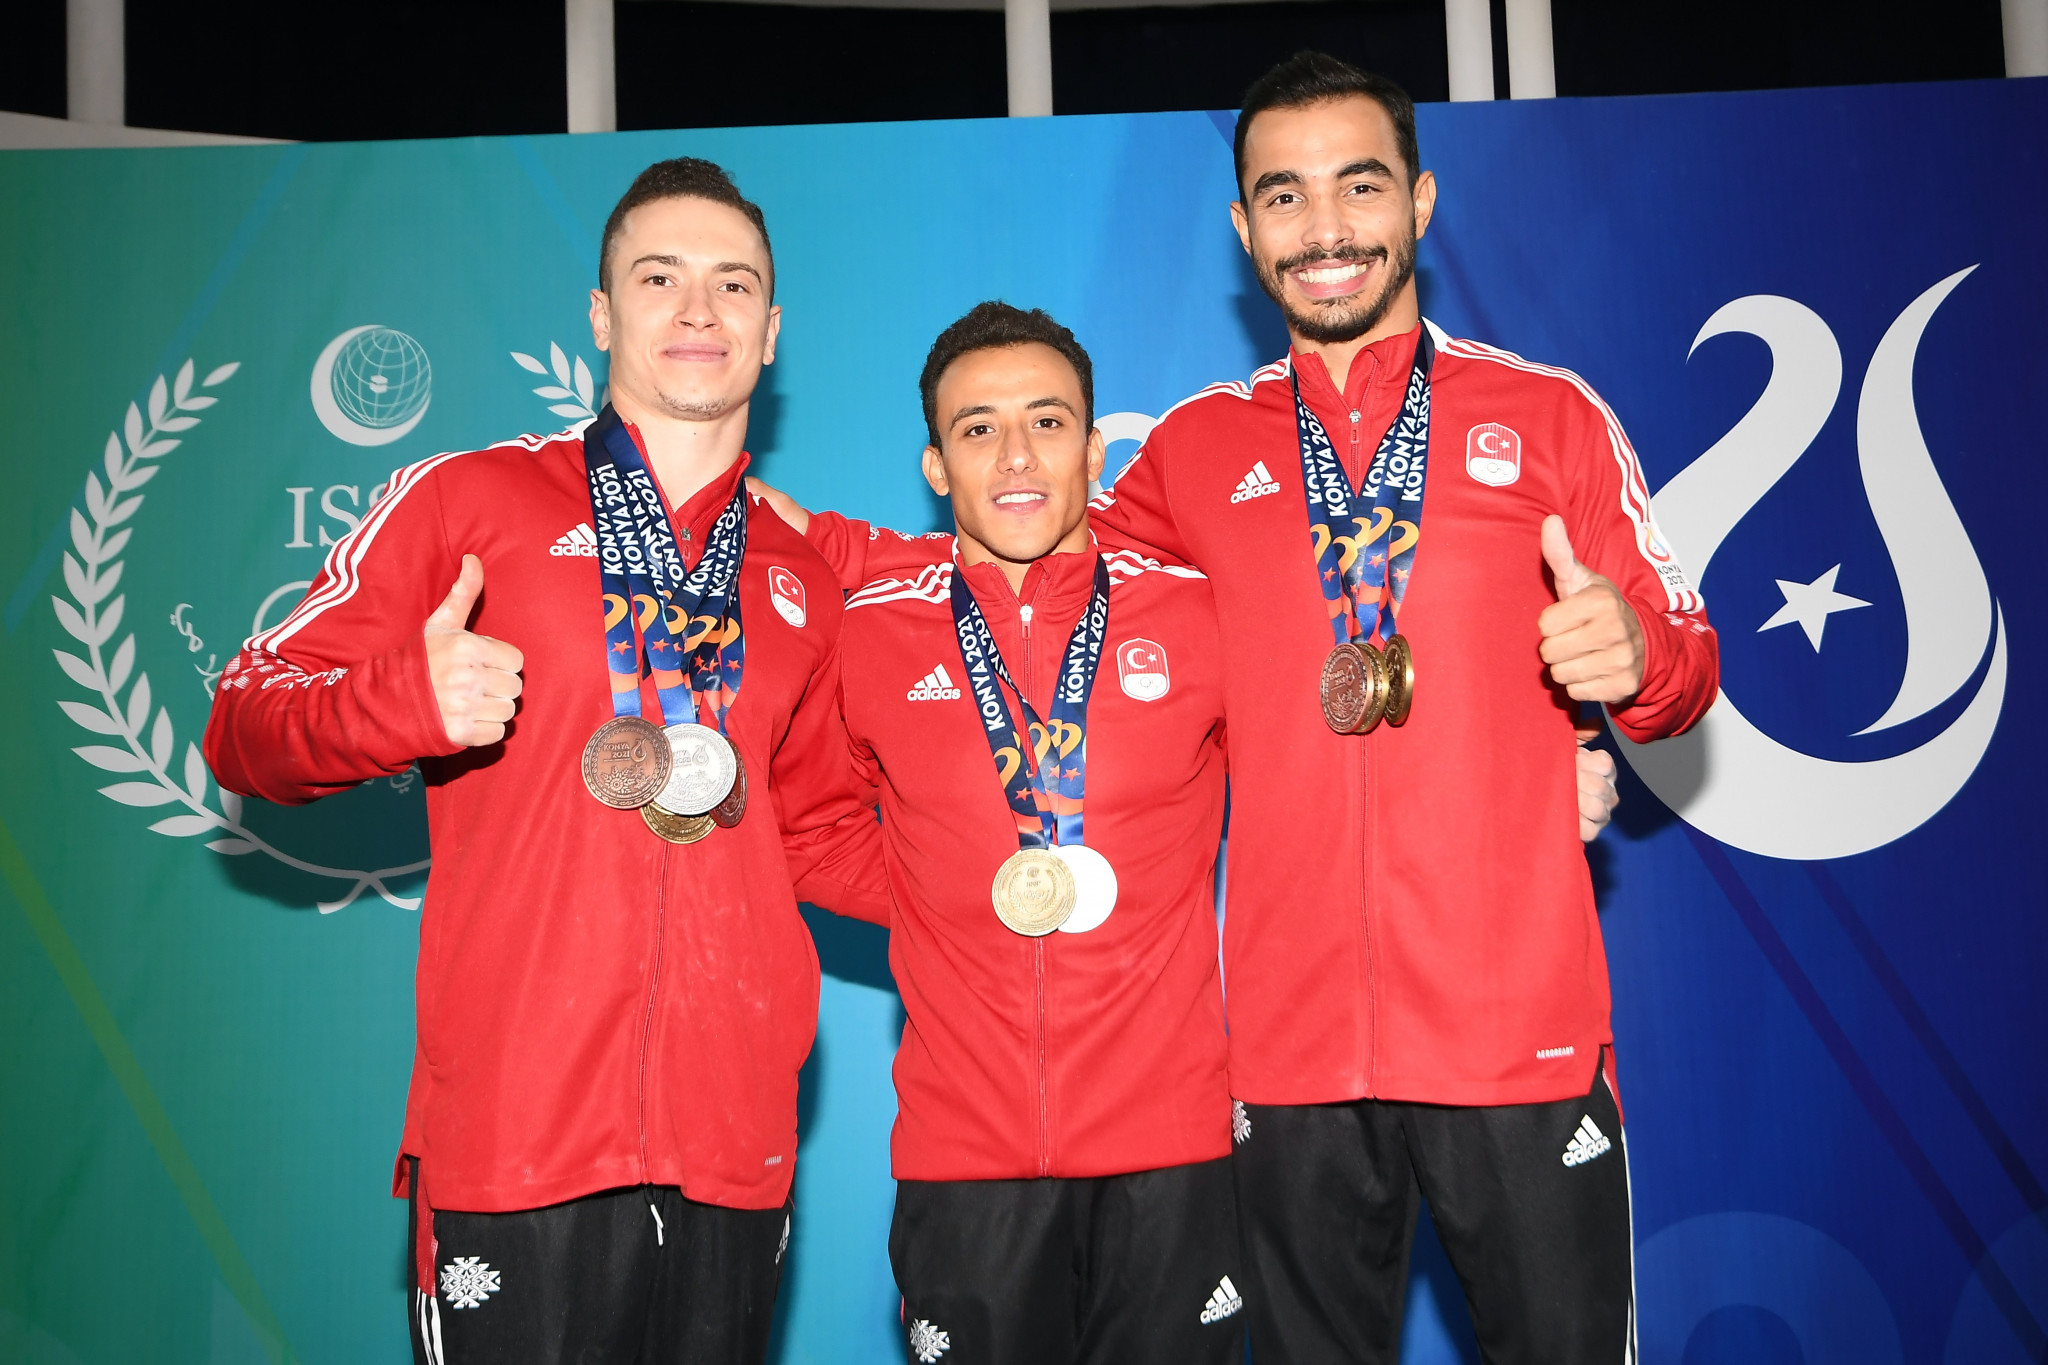 Turkey proved too strong in the men's artistic gymnastics as Önder, Adem Asil and Arican all won medals ©Konya 2021